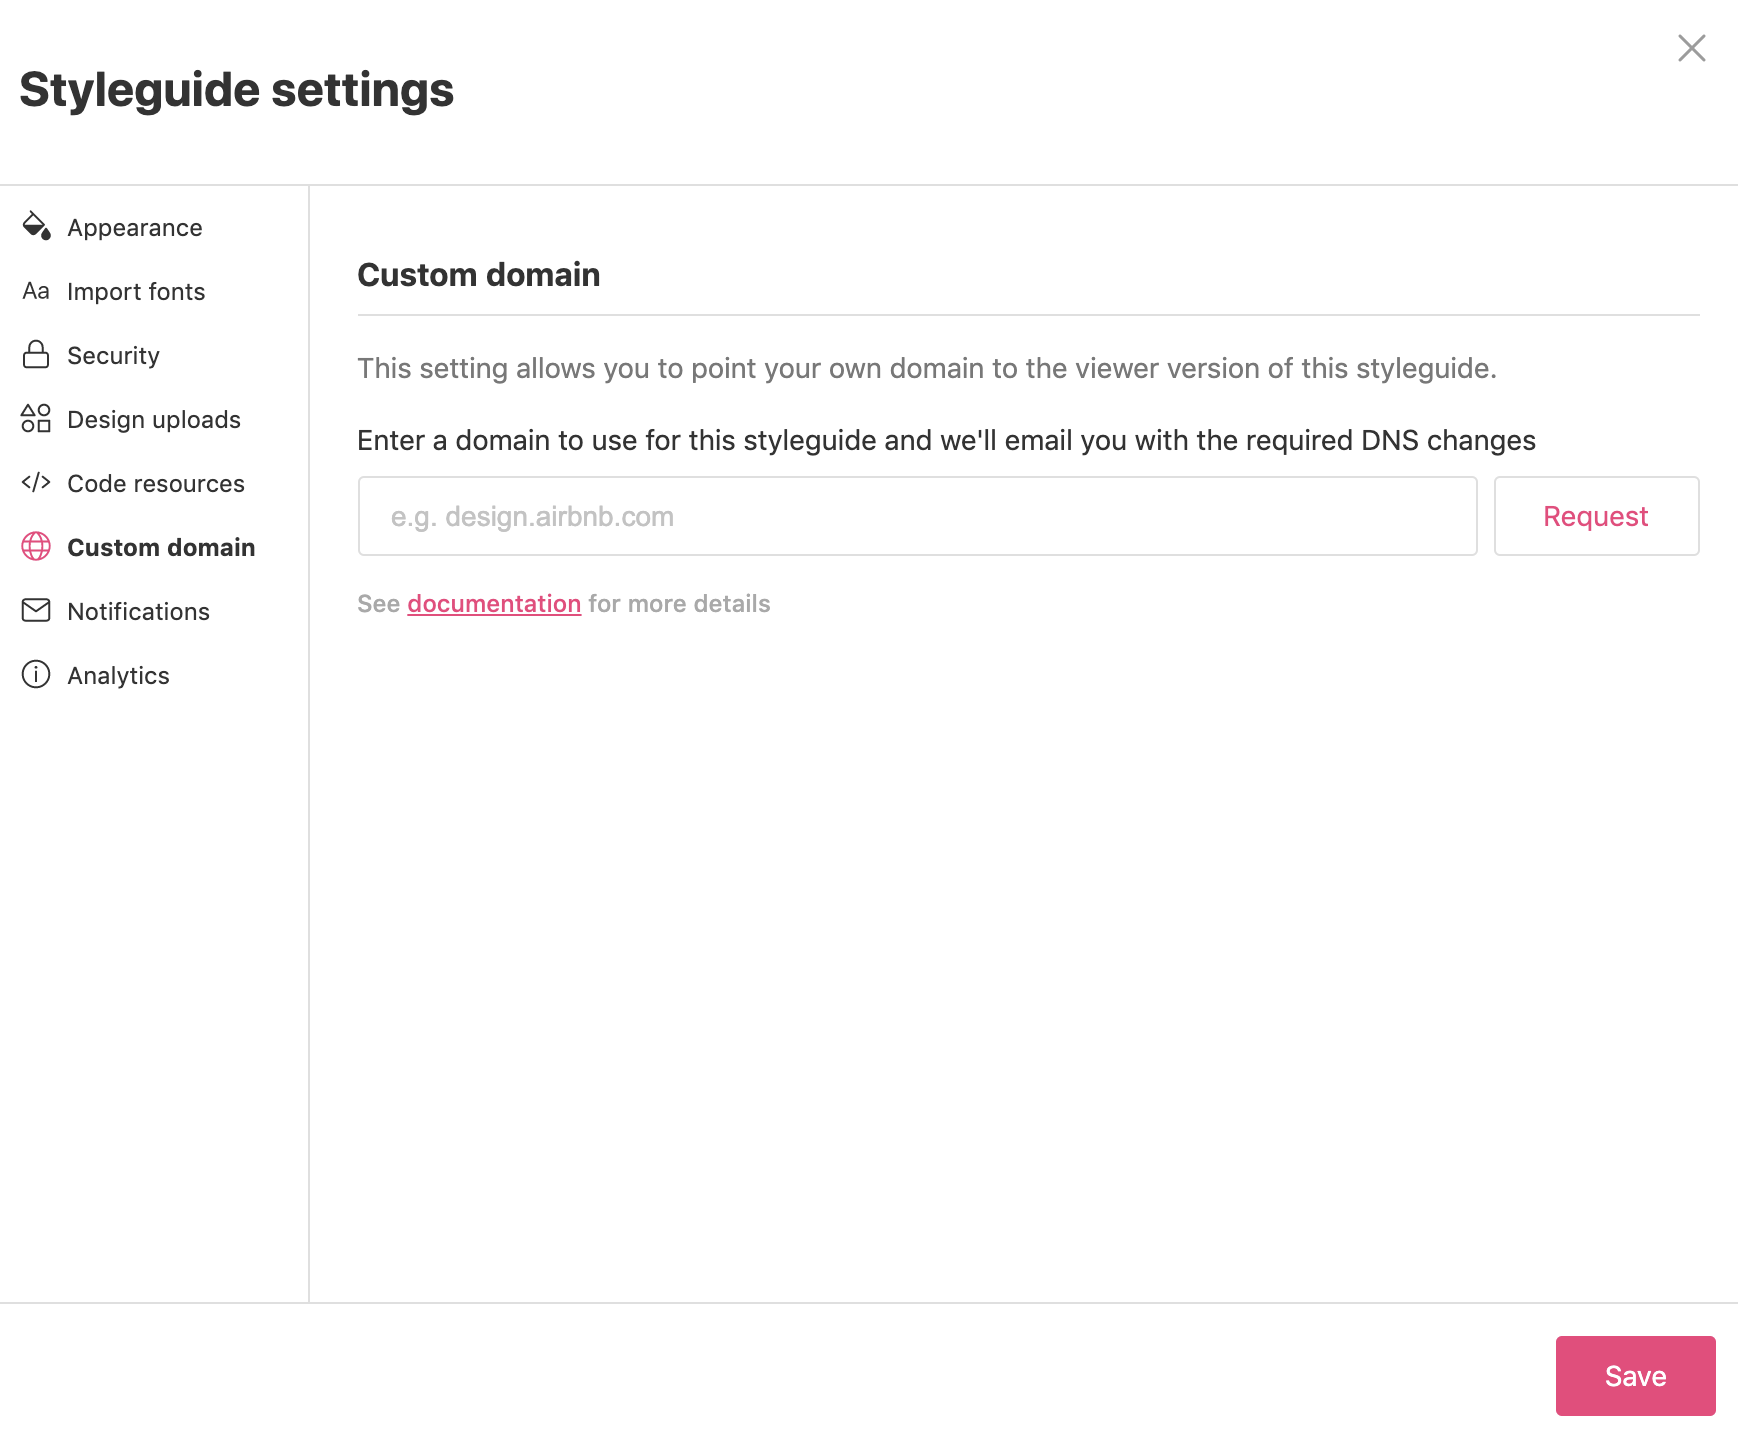 Custom domain page in Styleguide Settings